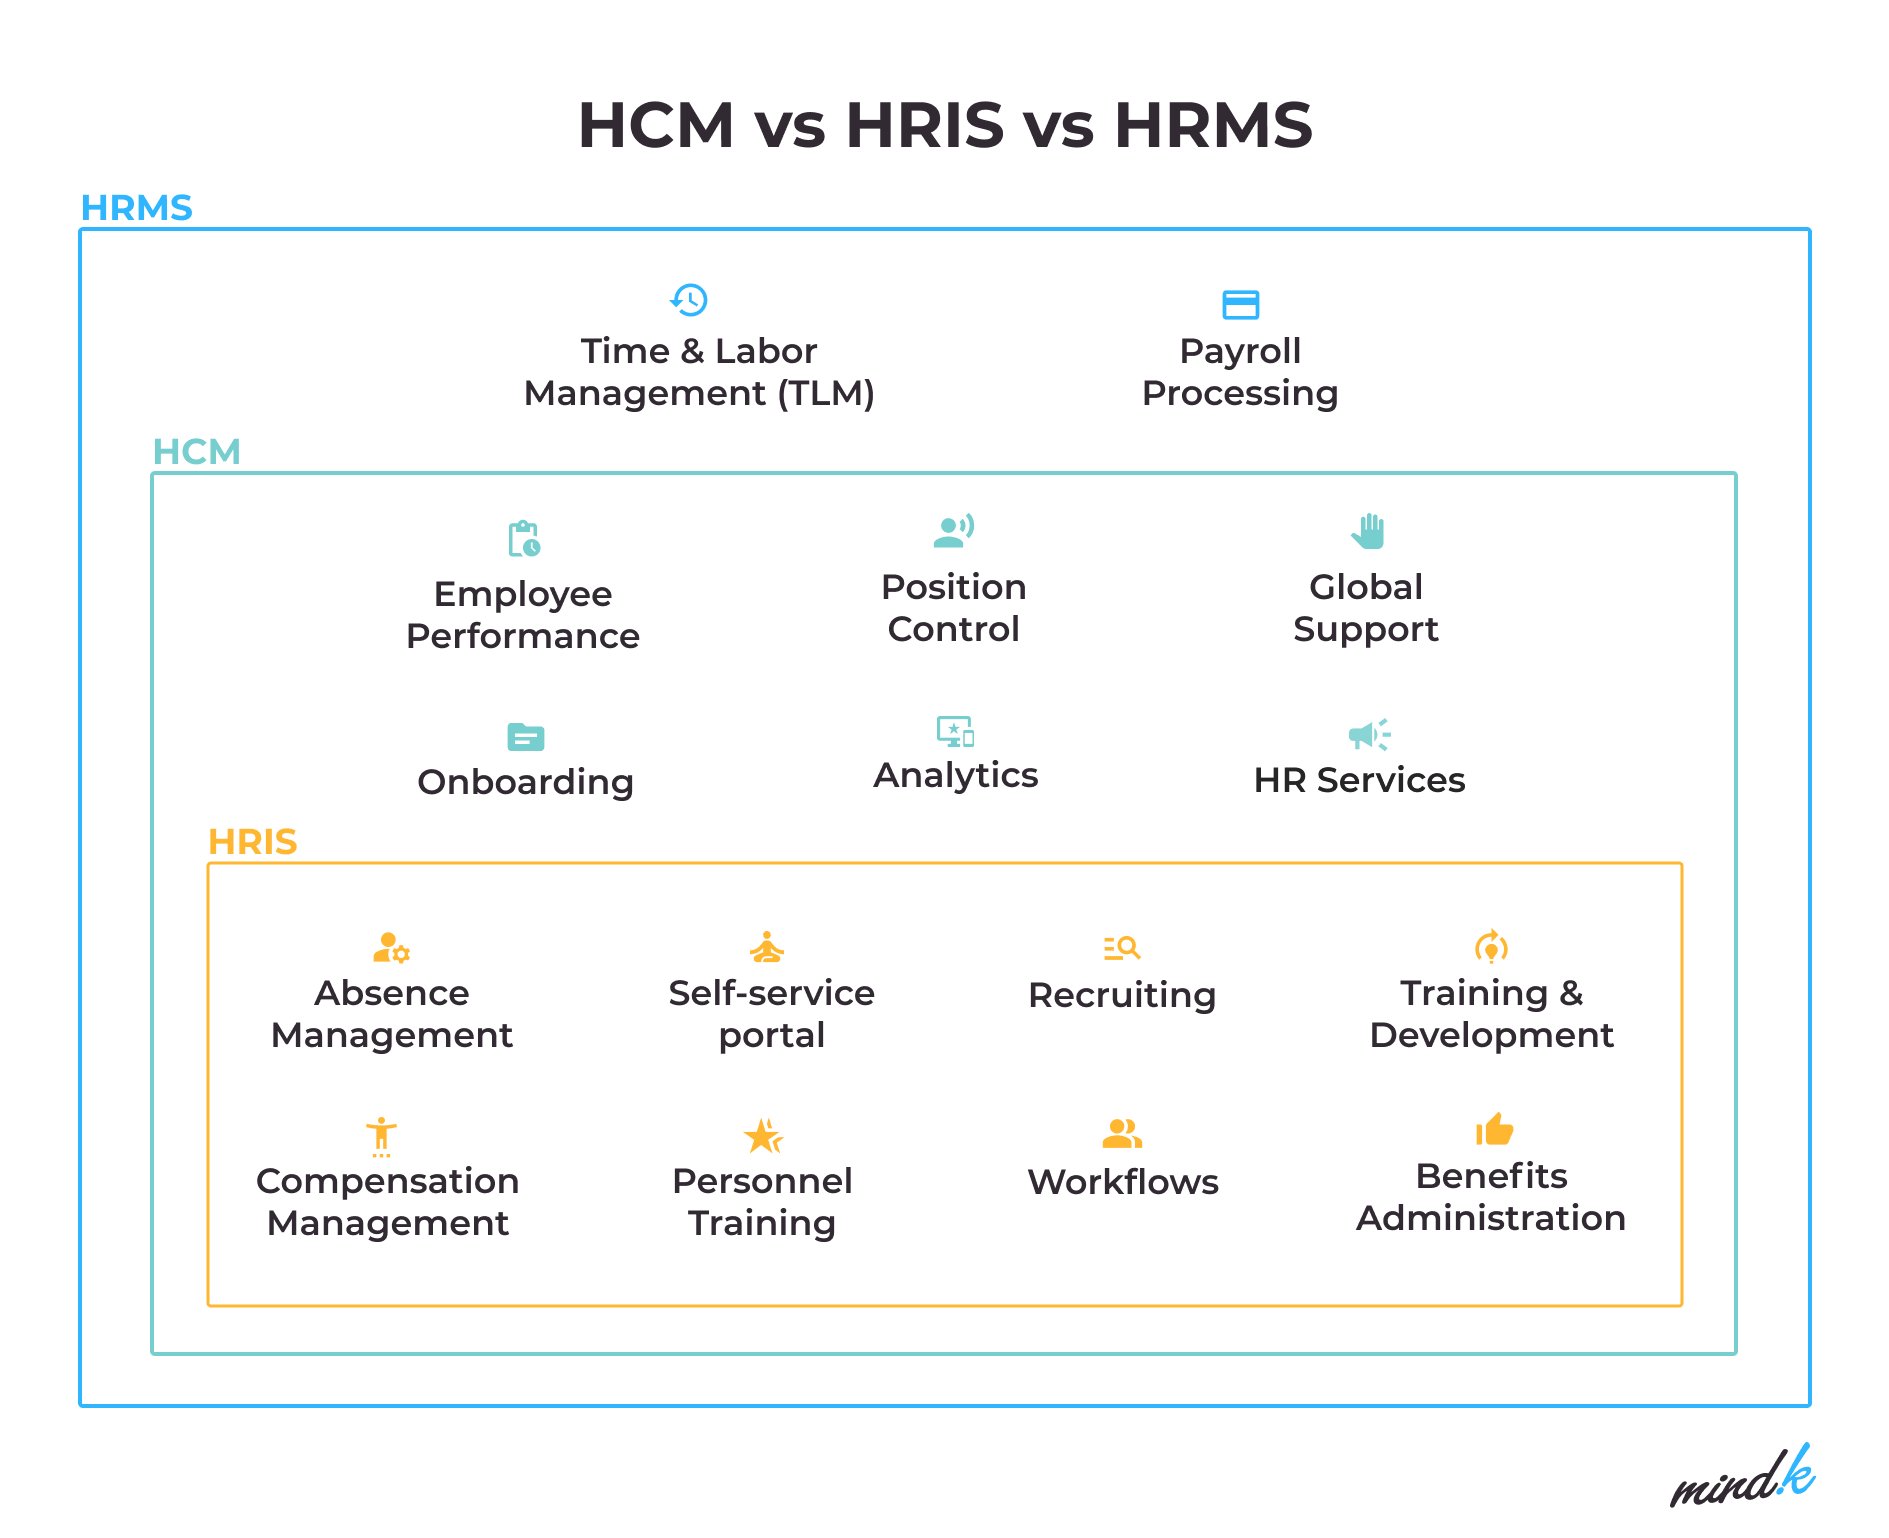 HRMS features